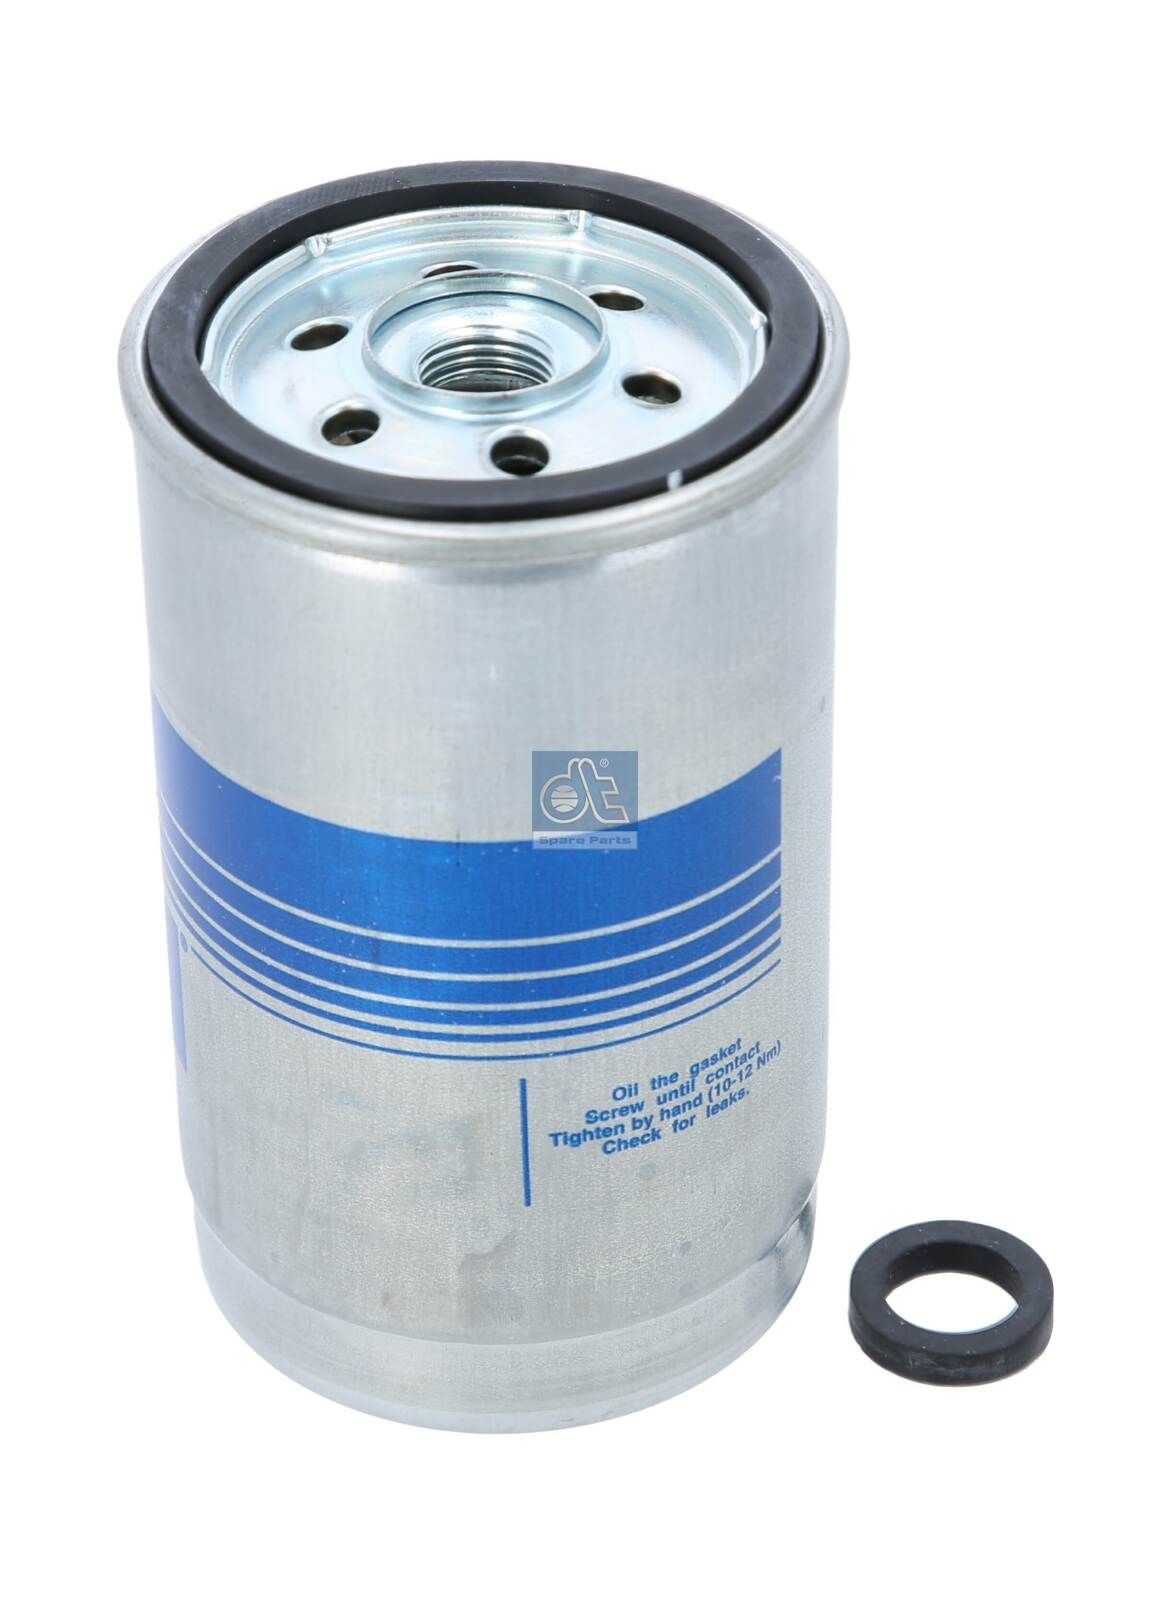 WDK 725 DT Spare Parts 3.22003 Fuel filter 51.12503.0040